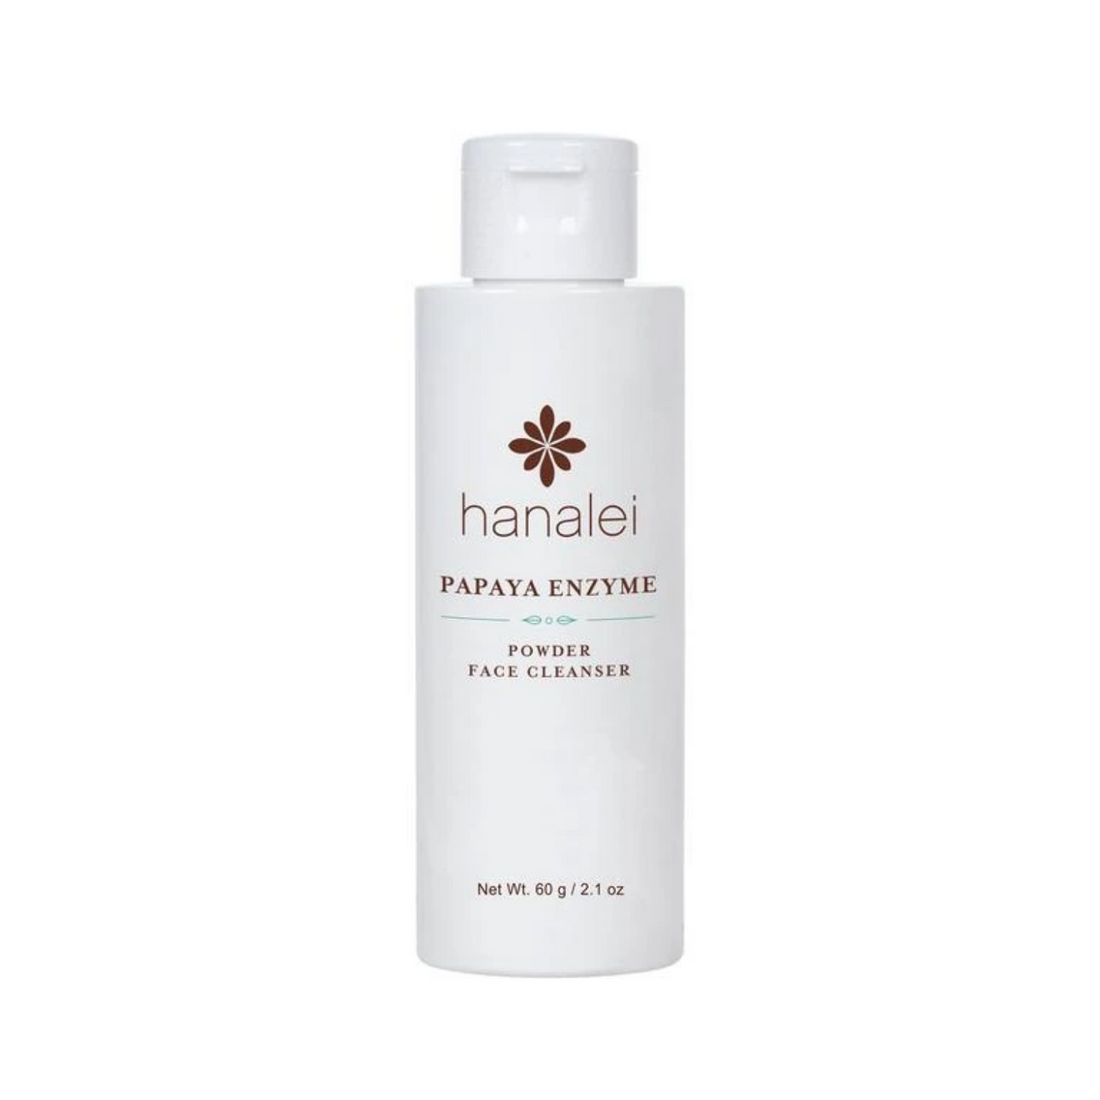 Cruelty-Free and Paraben-Free Papaya Powder Face Cleanser For Gentle Cleansing and Brightening For All Skin Types by Hanalei ? Full Size (60g) 2.11 Ounce (Pack of 1)